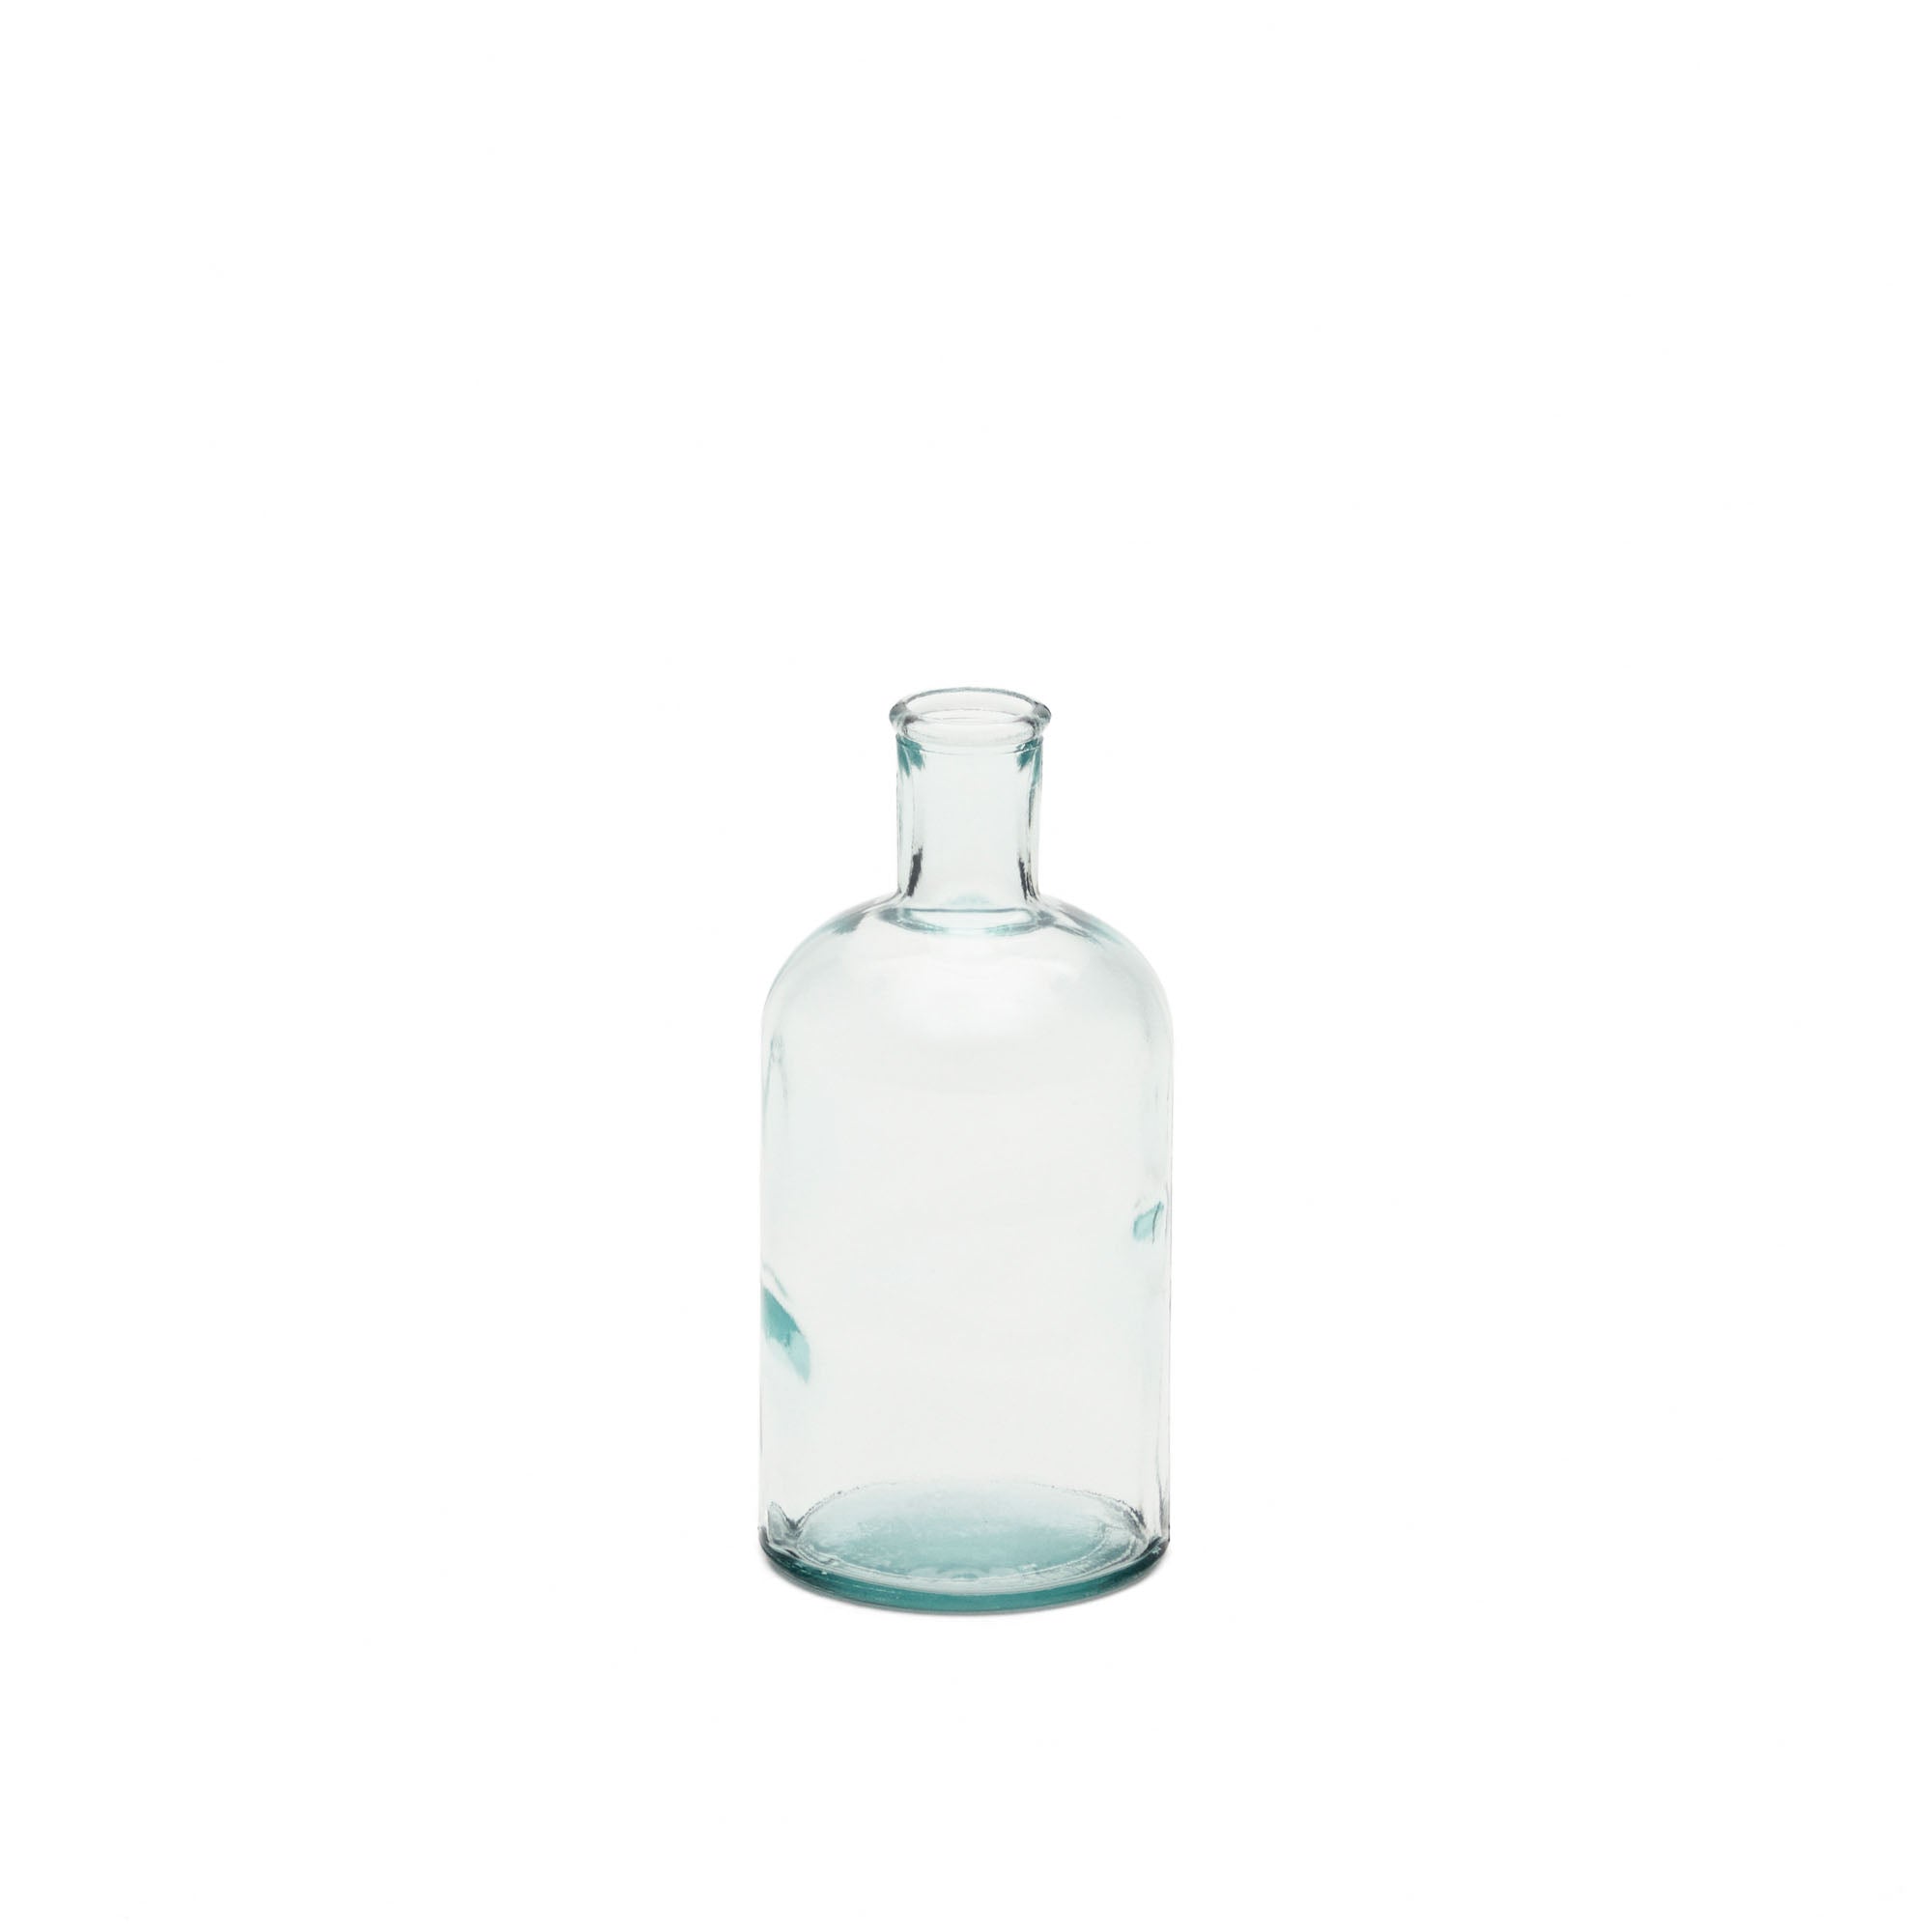 Brenna vase in 100% recycled transparent glass, 19 cm